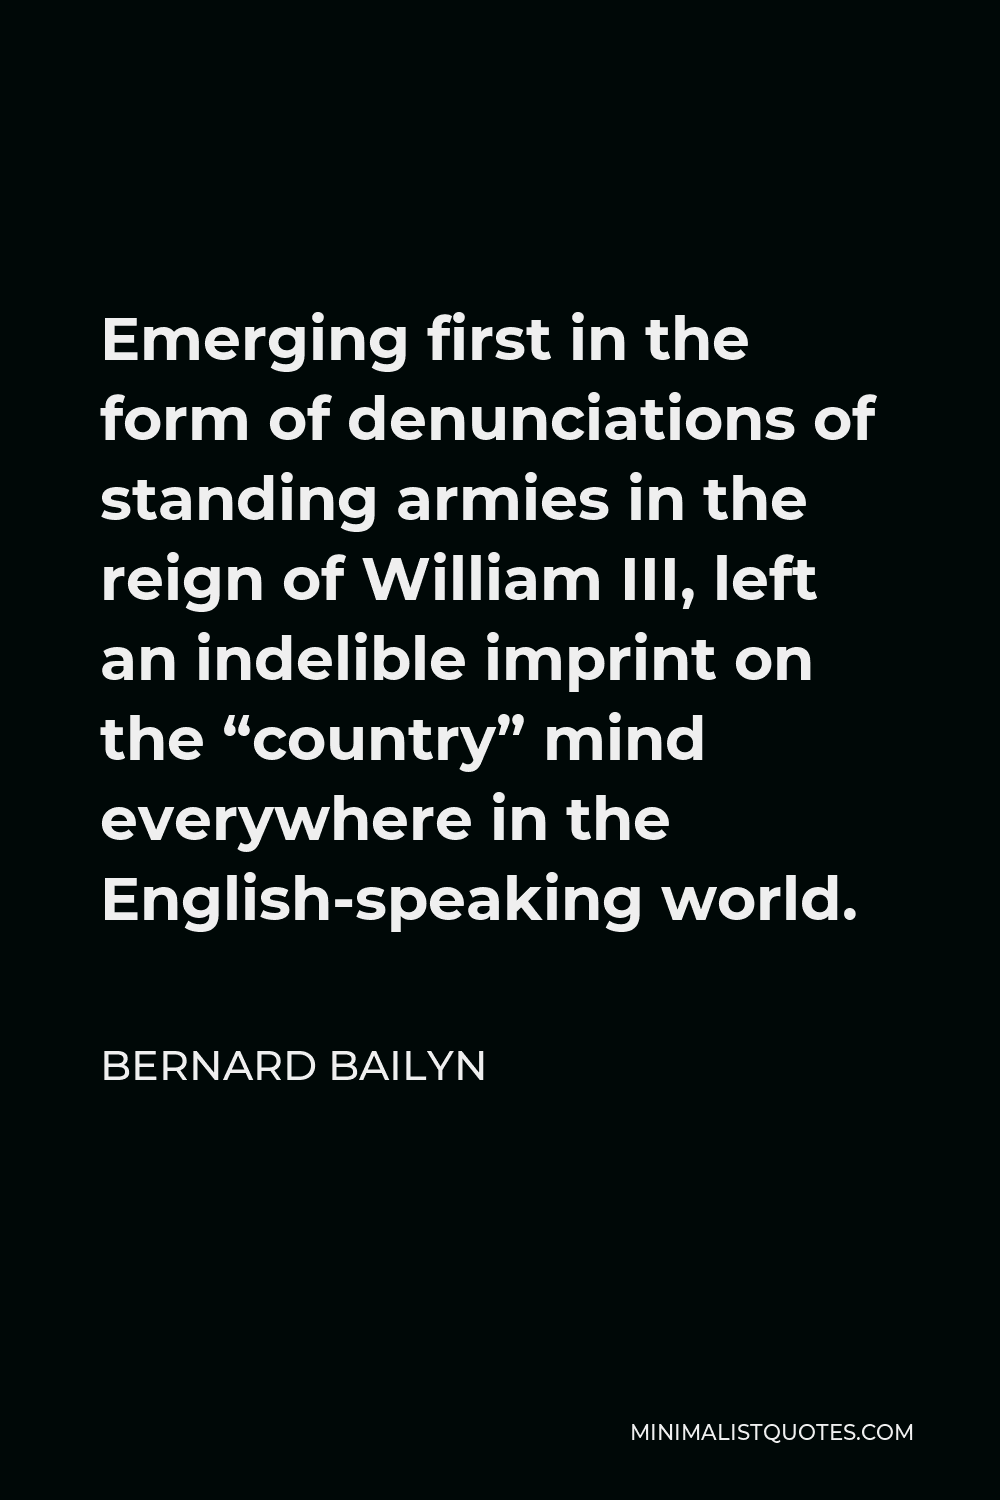 Bernard Bailyn Quote - Emerging first in the form of denunciations of standing armies in the reign of William III, left an indelible imprint on the “country” mind everywhere in the English-speaking world.